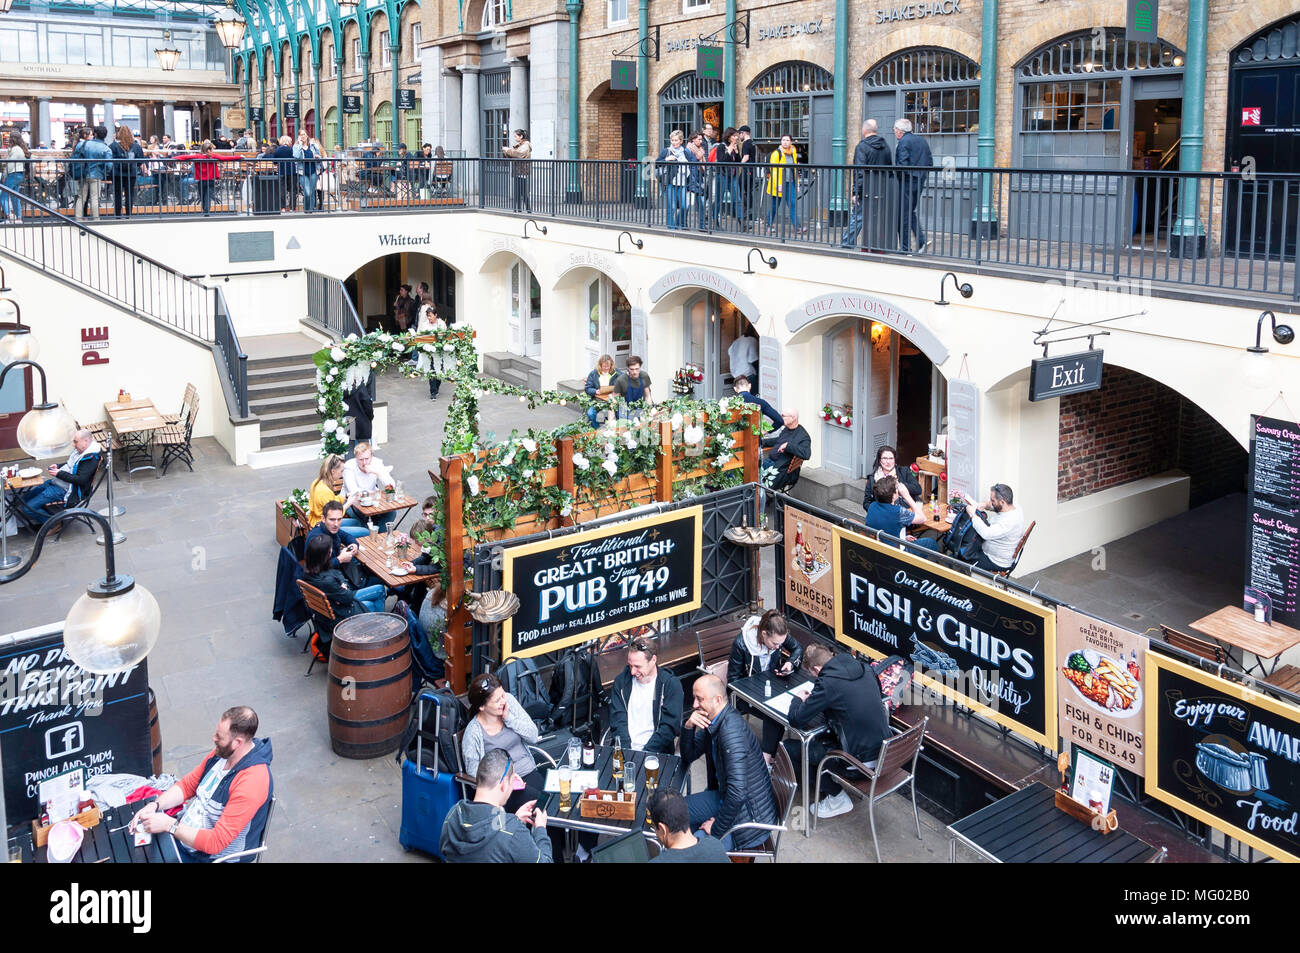 Punch & Judy Pub Courtyard Garden a Covent Garden Market, Covent Garden, City of Westminster, Londra, Inghilterra, Regno Unito Foto Stock